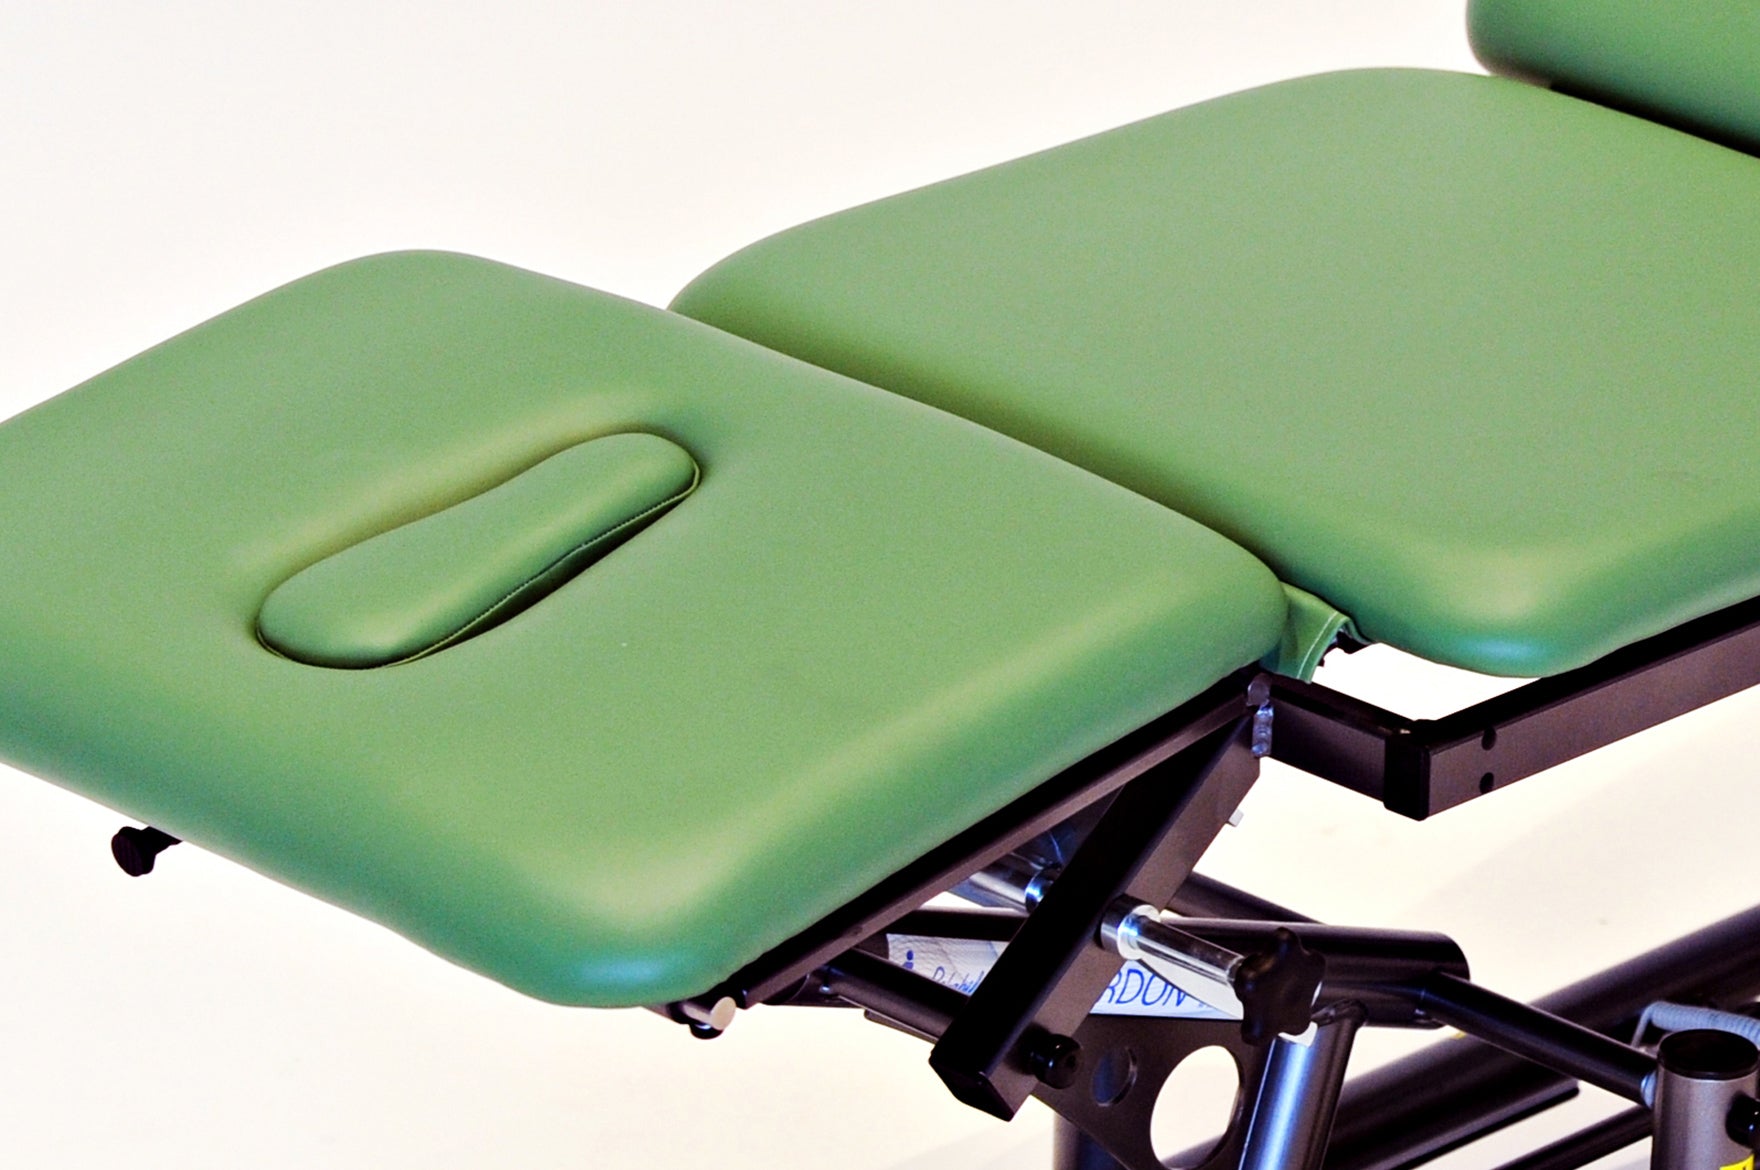 Manual Physical Therapy Table (MPT)